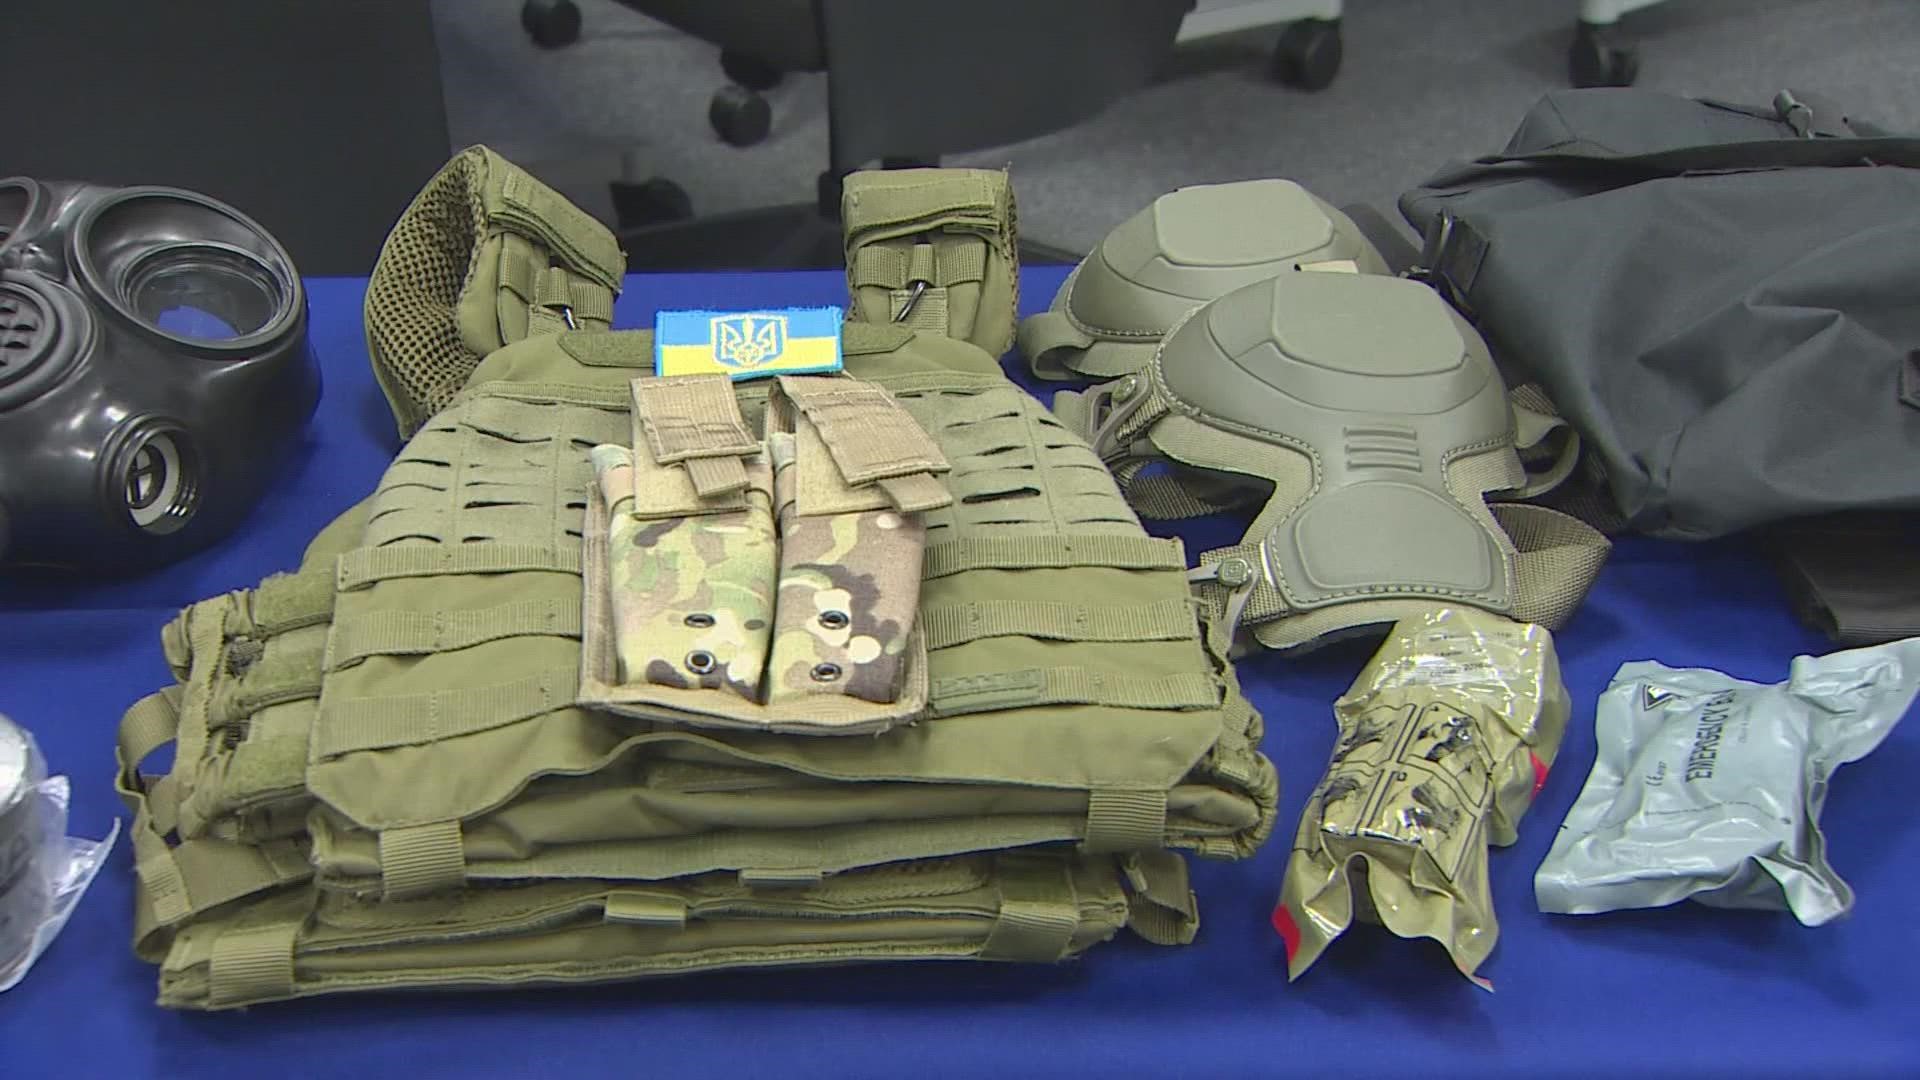 HCSO said they're donating nine pallets of decommissioned tactical gear, including bulletproof vests, shields and helmets they can no longer use.